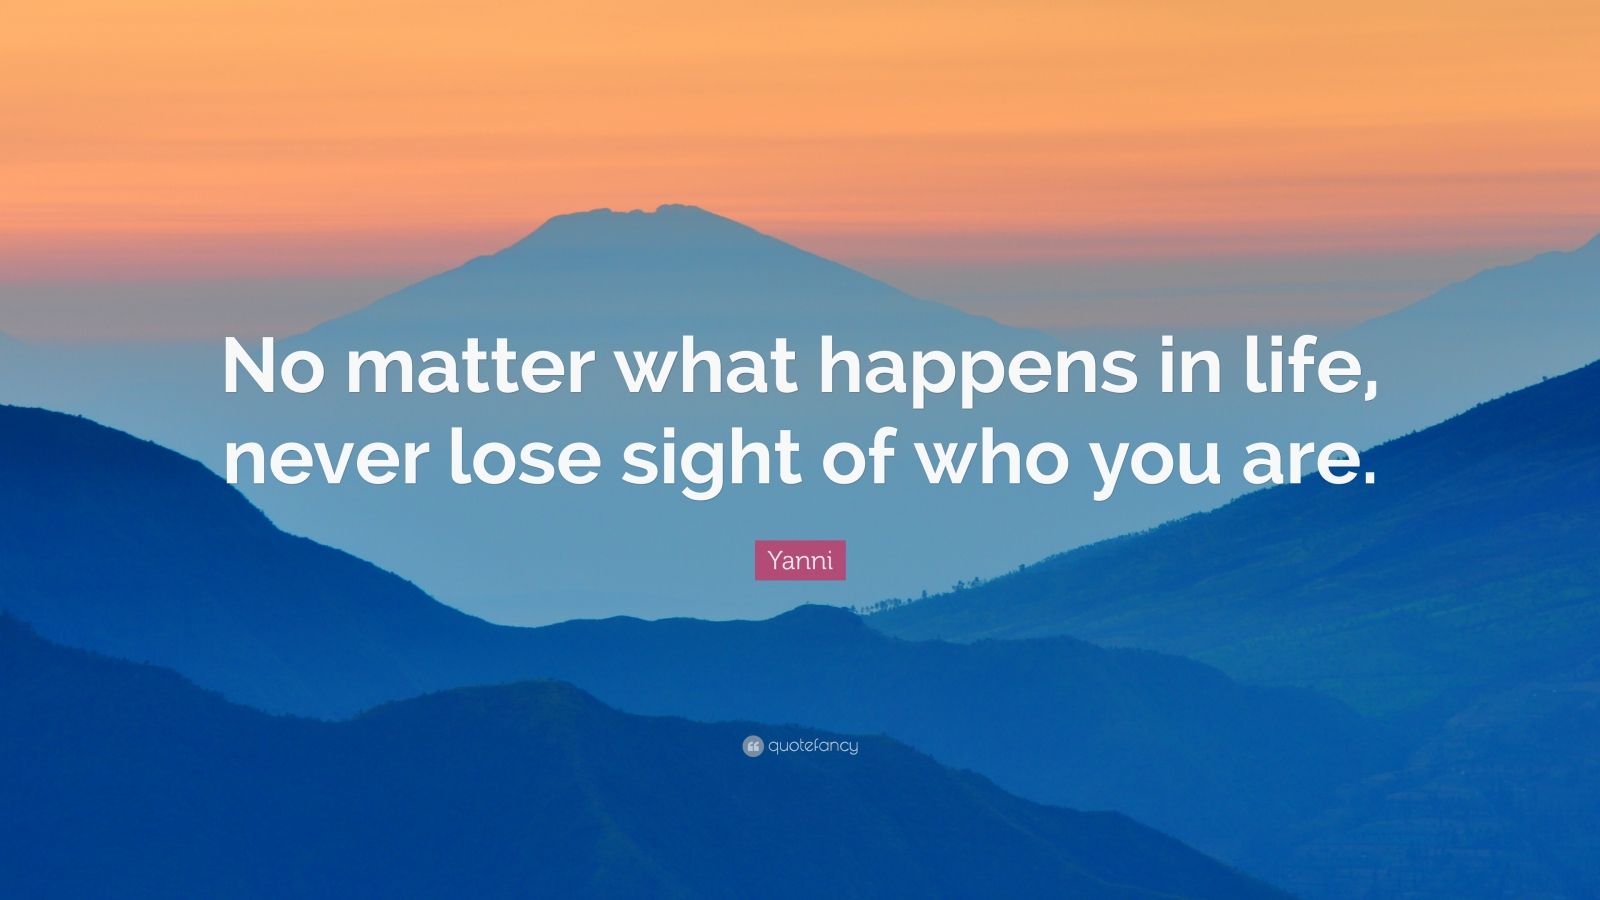 Yanni Quote: “No matter what happens in life, never lose sight of who ...